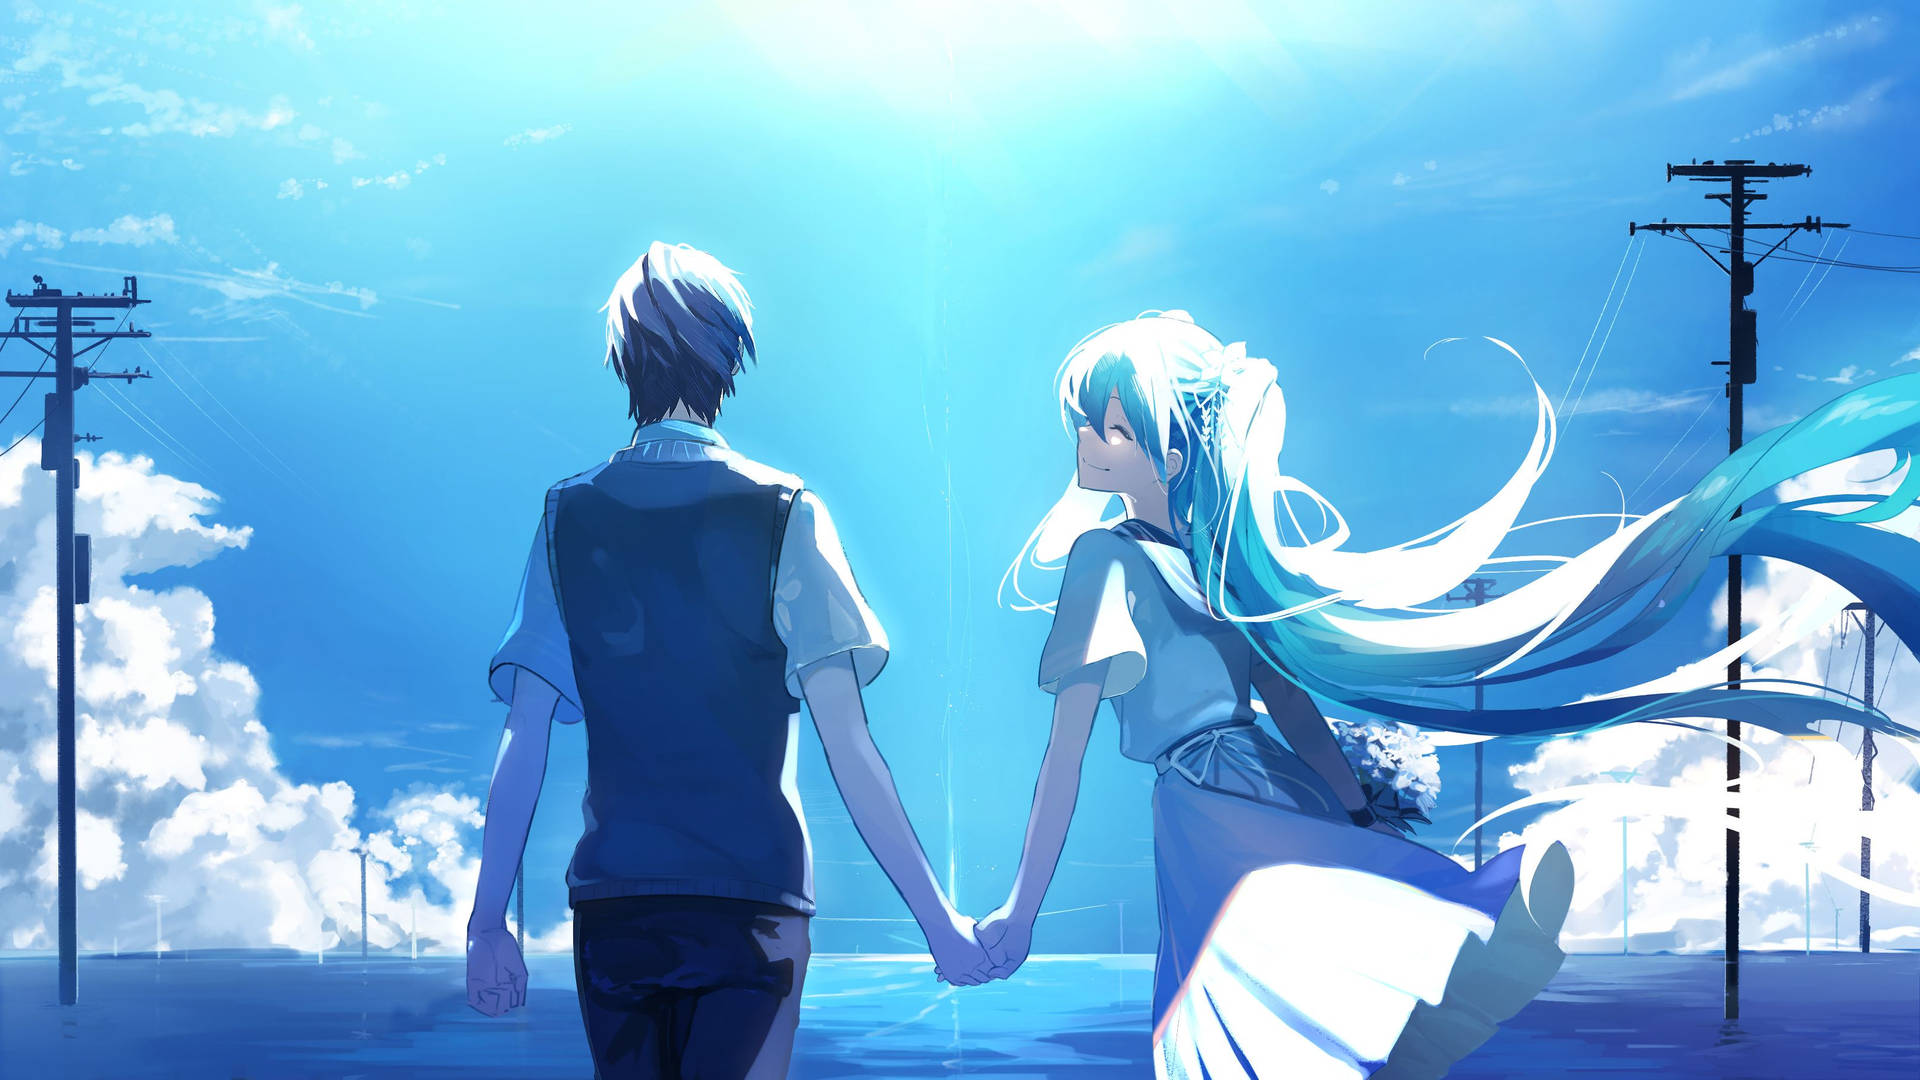 Anime Love Couple Holding Hands Background